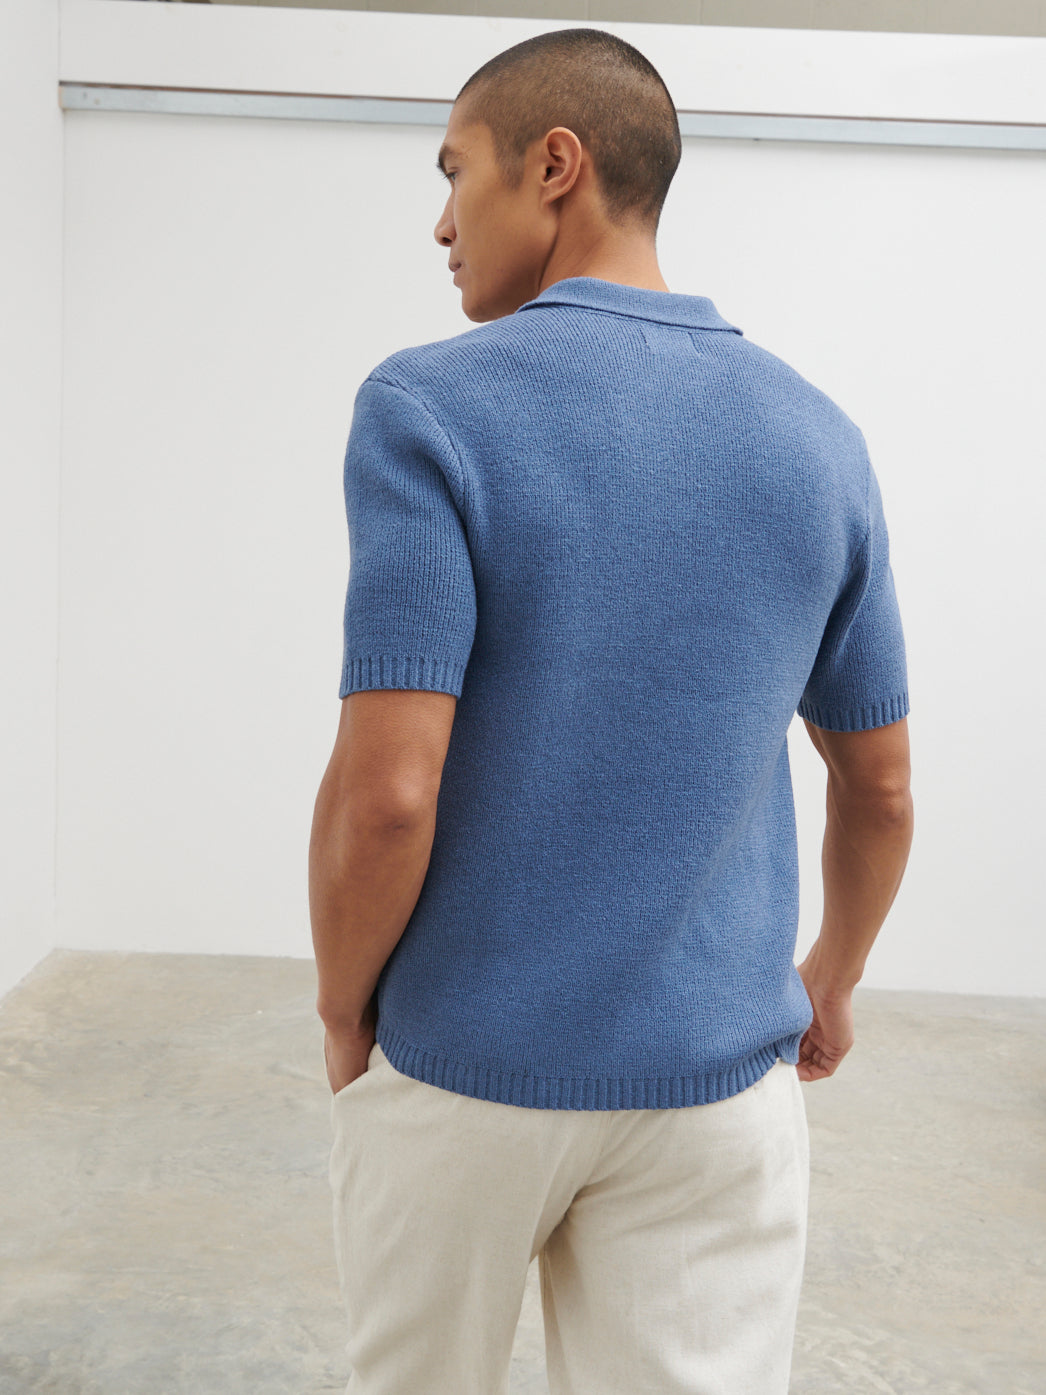 Ollie Textured Knit Button Polo - Blue